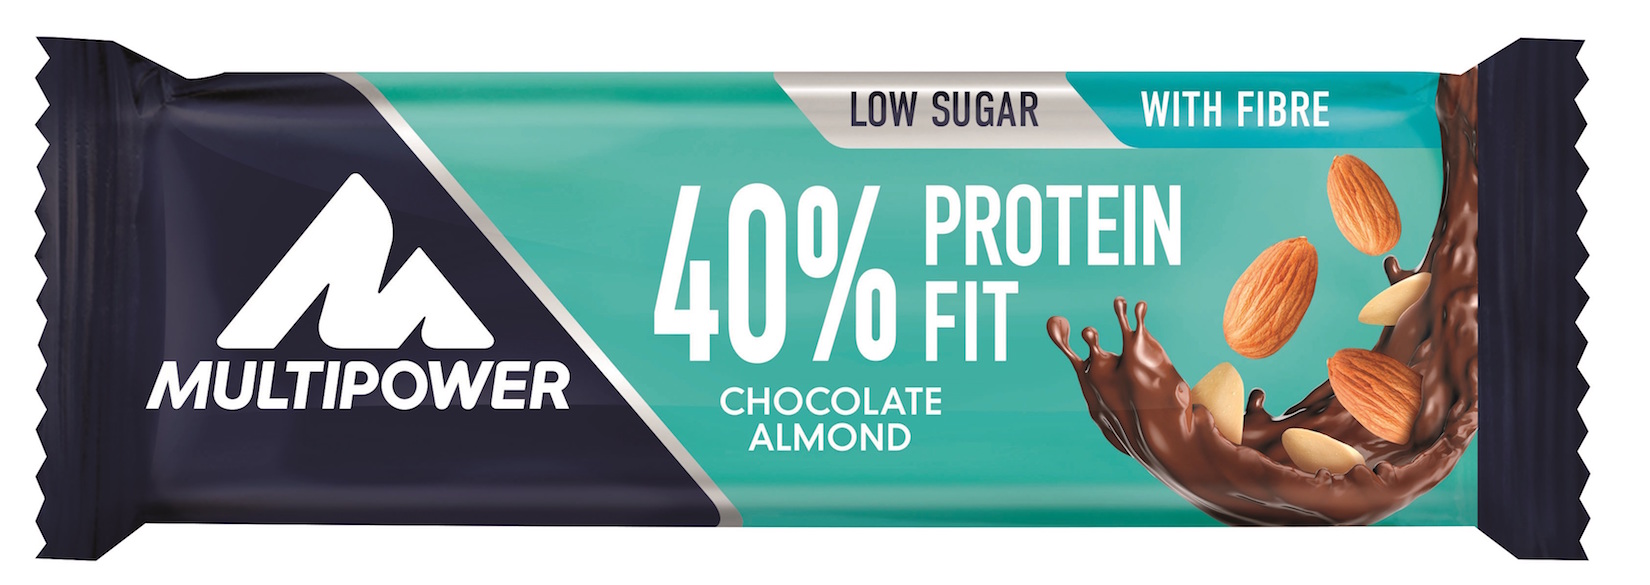 MNULTIPOWER 40 Protein Fit Chocolate Almond